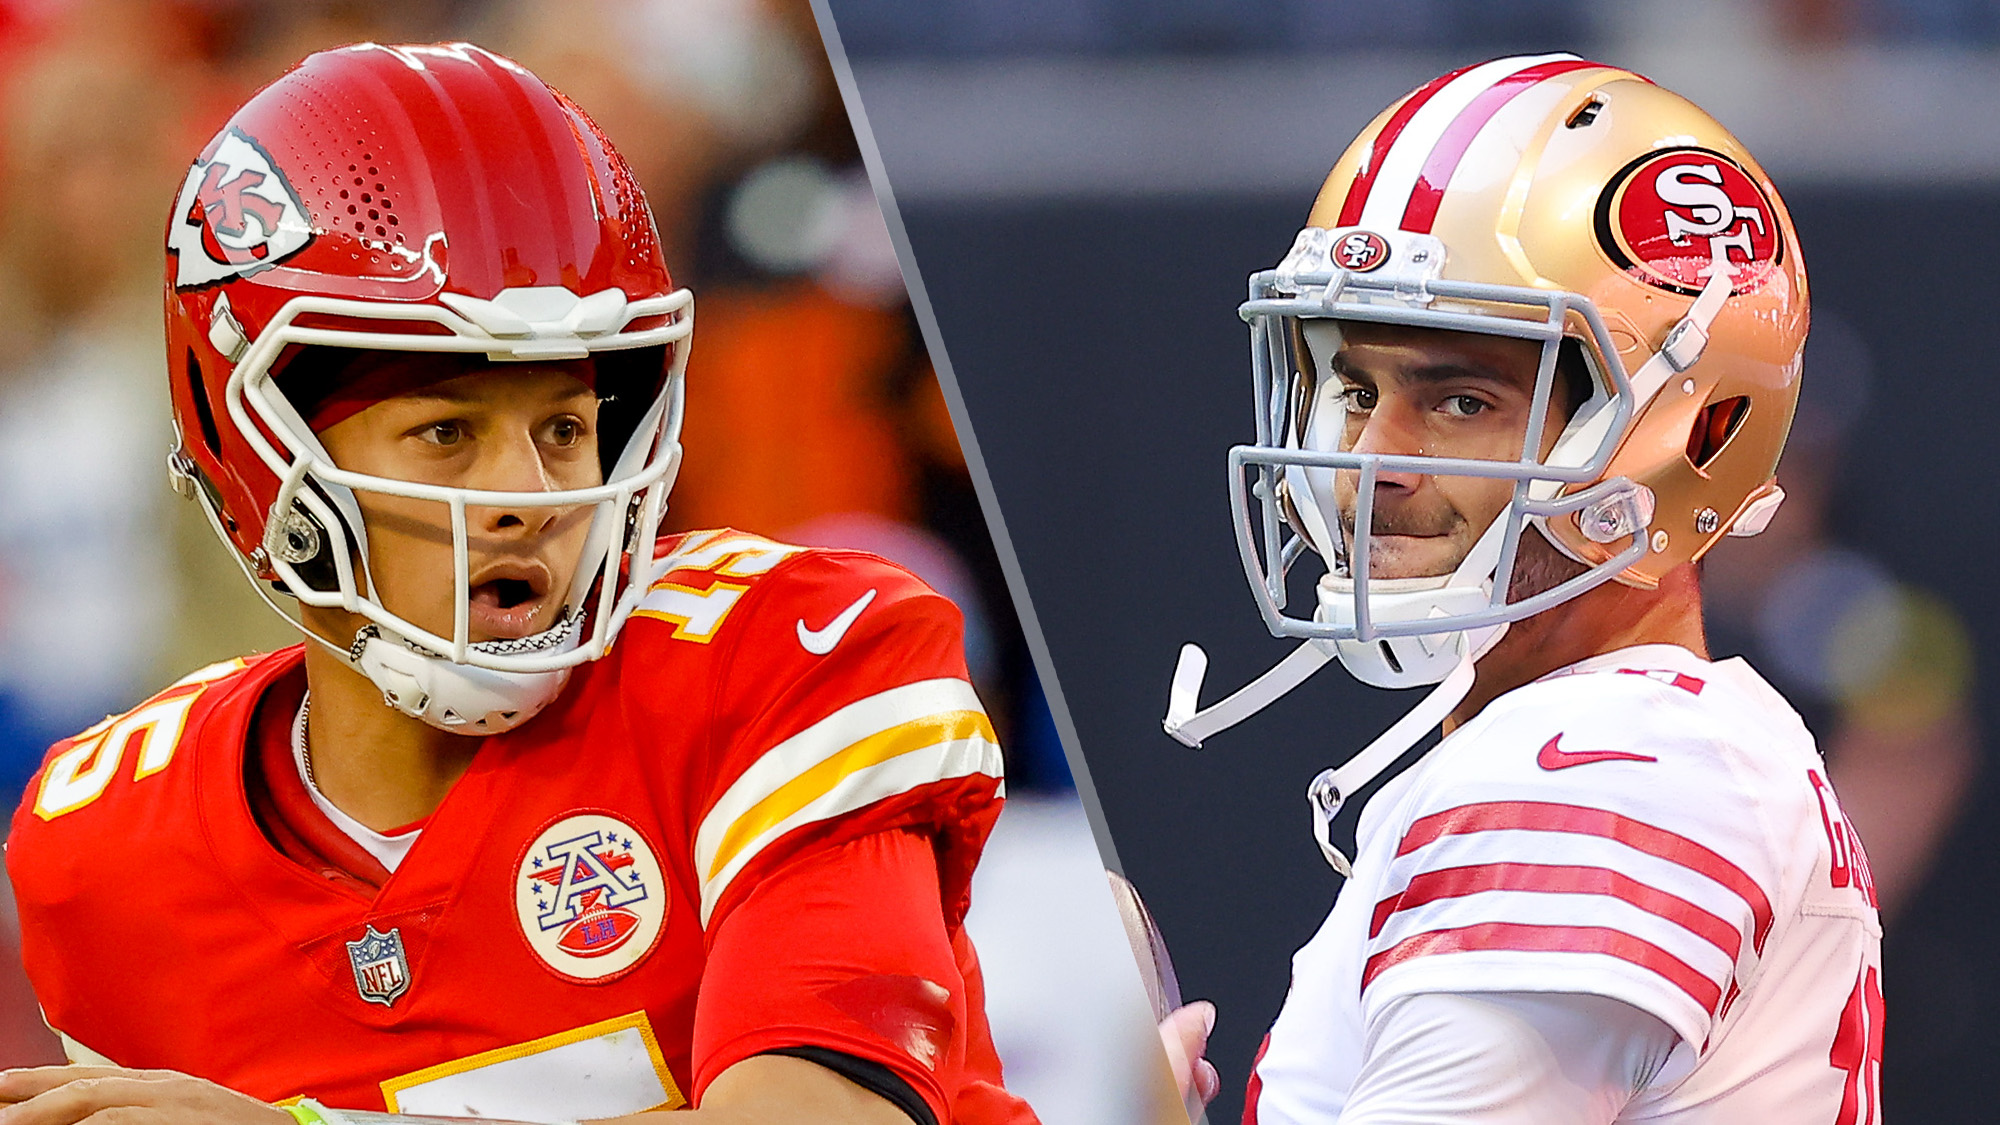 49ers vs chiefs game live